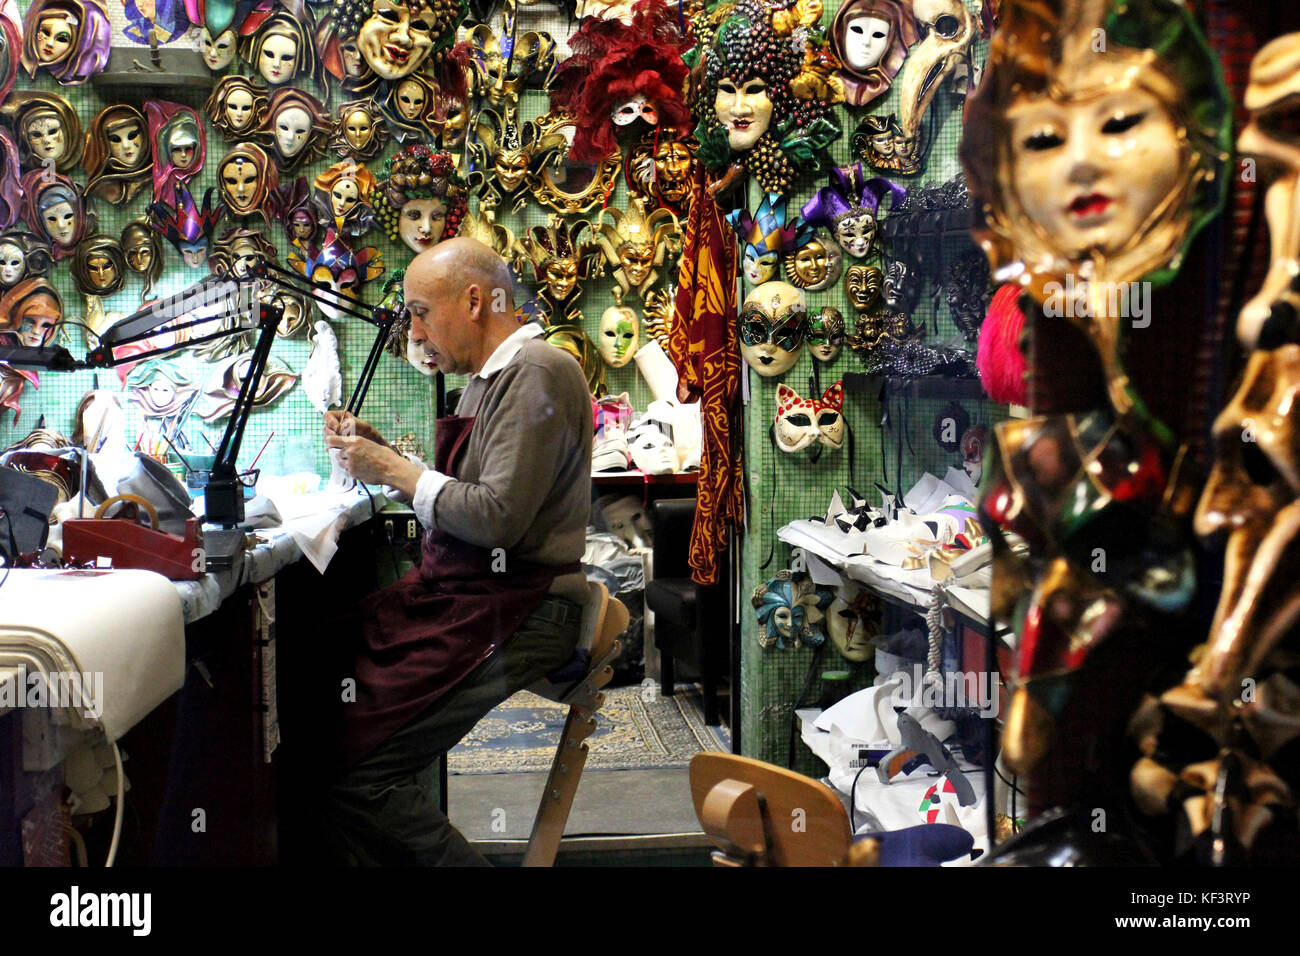 Artist working in mask shop, Venice, Italy, Europe. Stock Photo